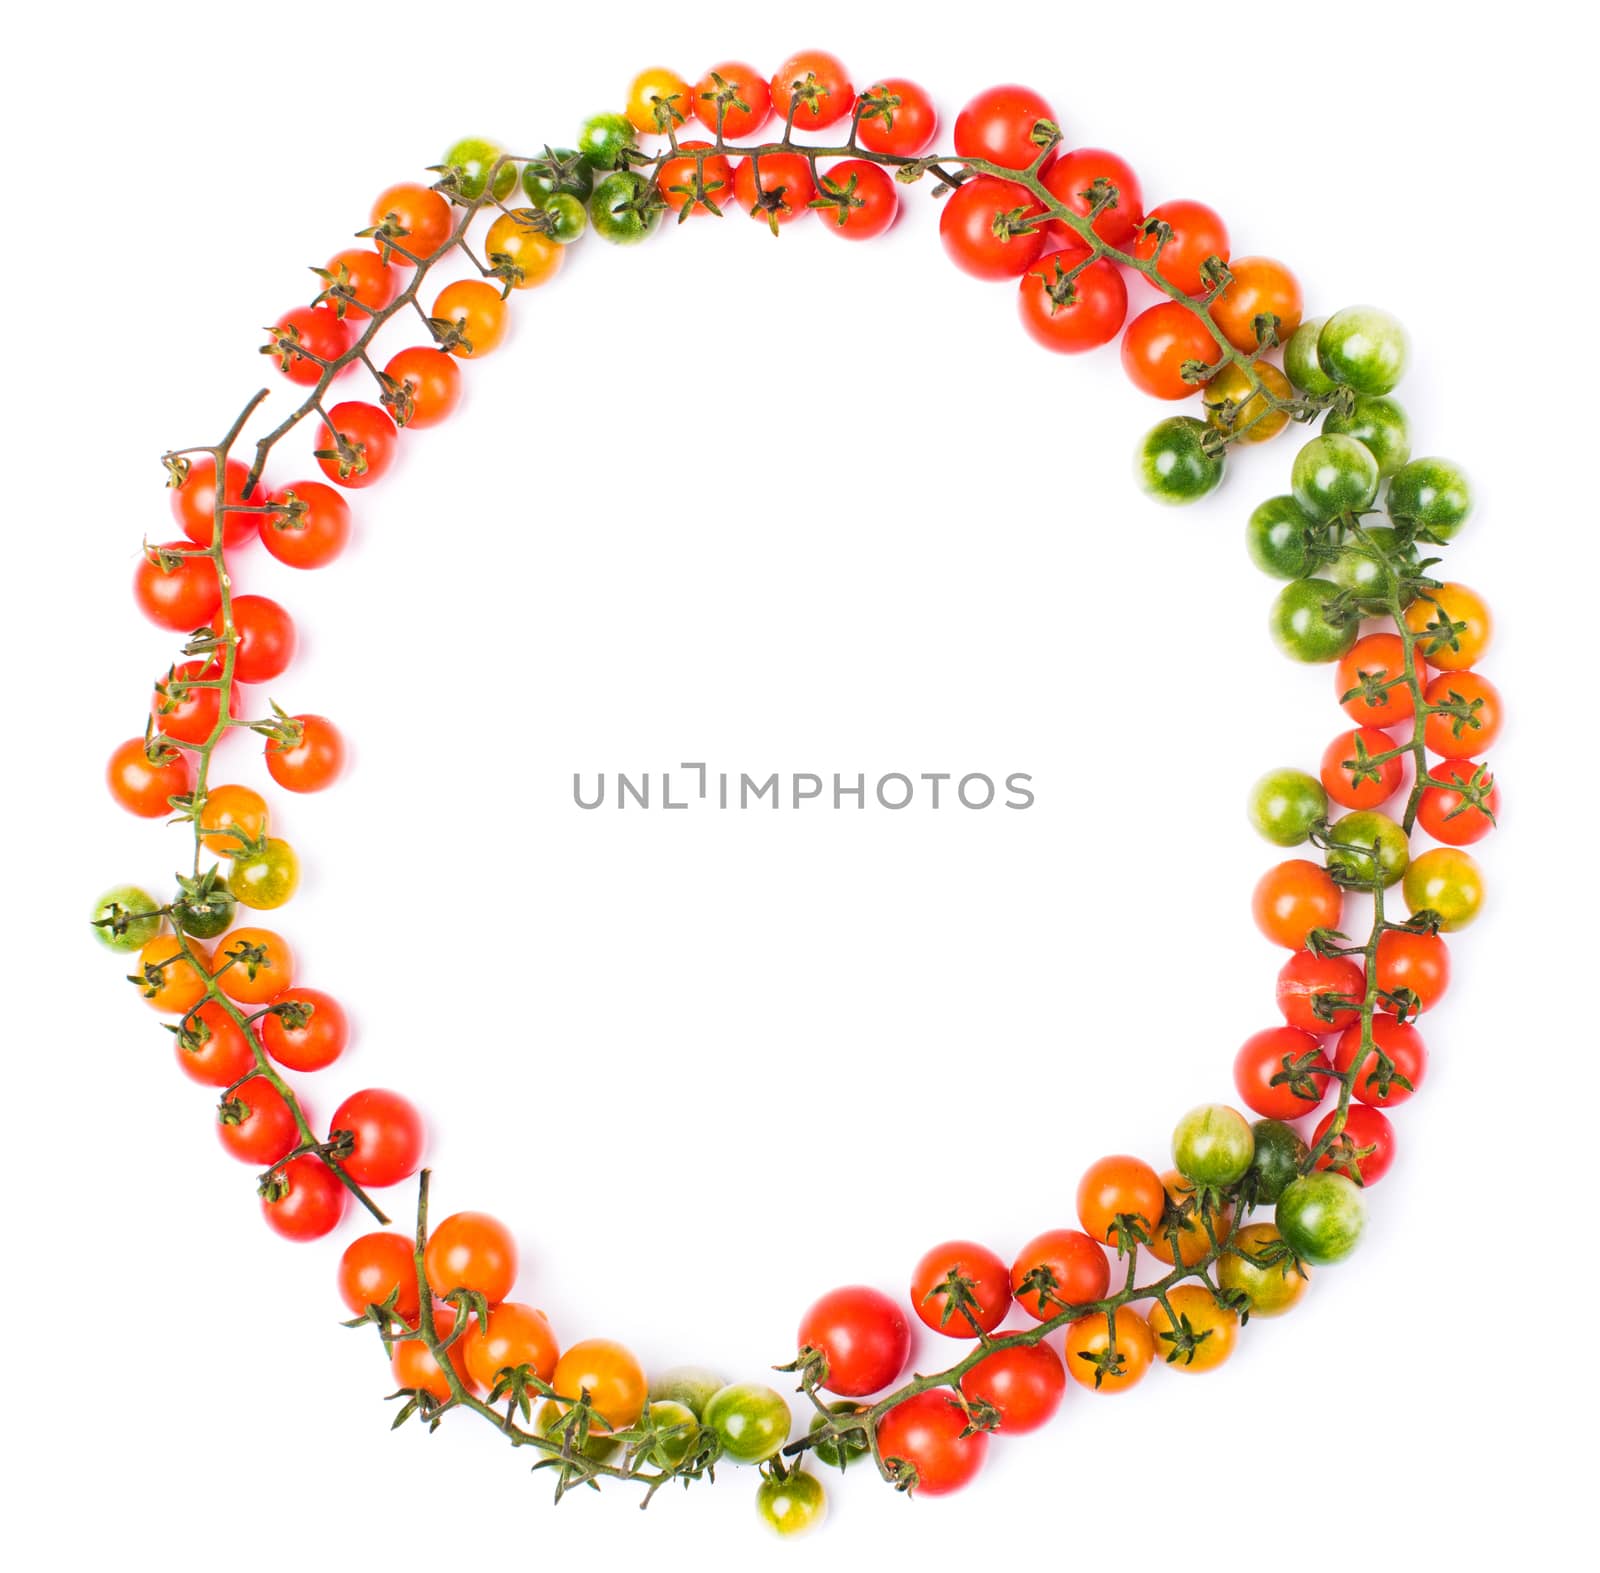 Healthy lifestyle cherry tomatoes  by Arsgera